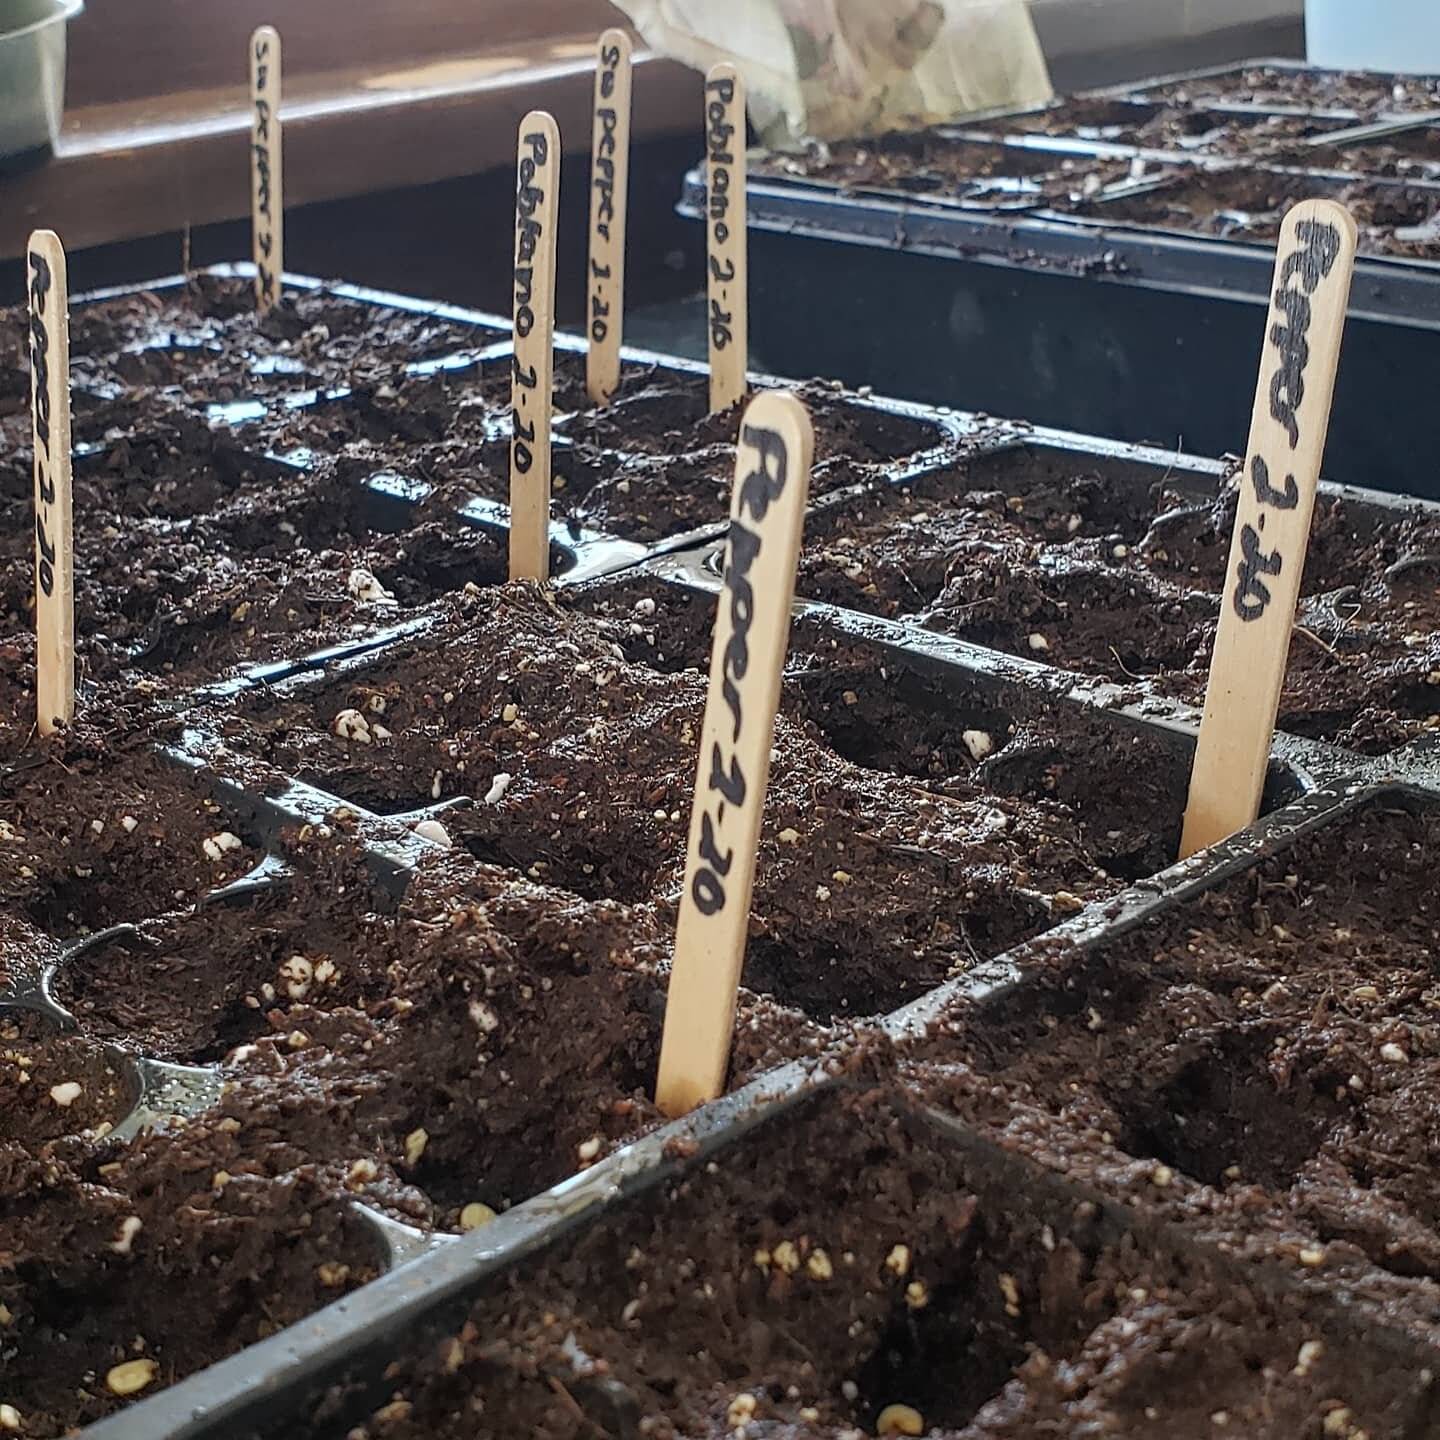 It's beginning! (Well... it already started,  let's be serious.  My basement is coming up with seedlings). Today's planting includes allllll the peppers. Grow babies grow! Momma needs some color in her life.